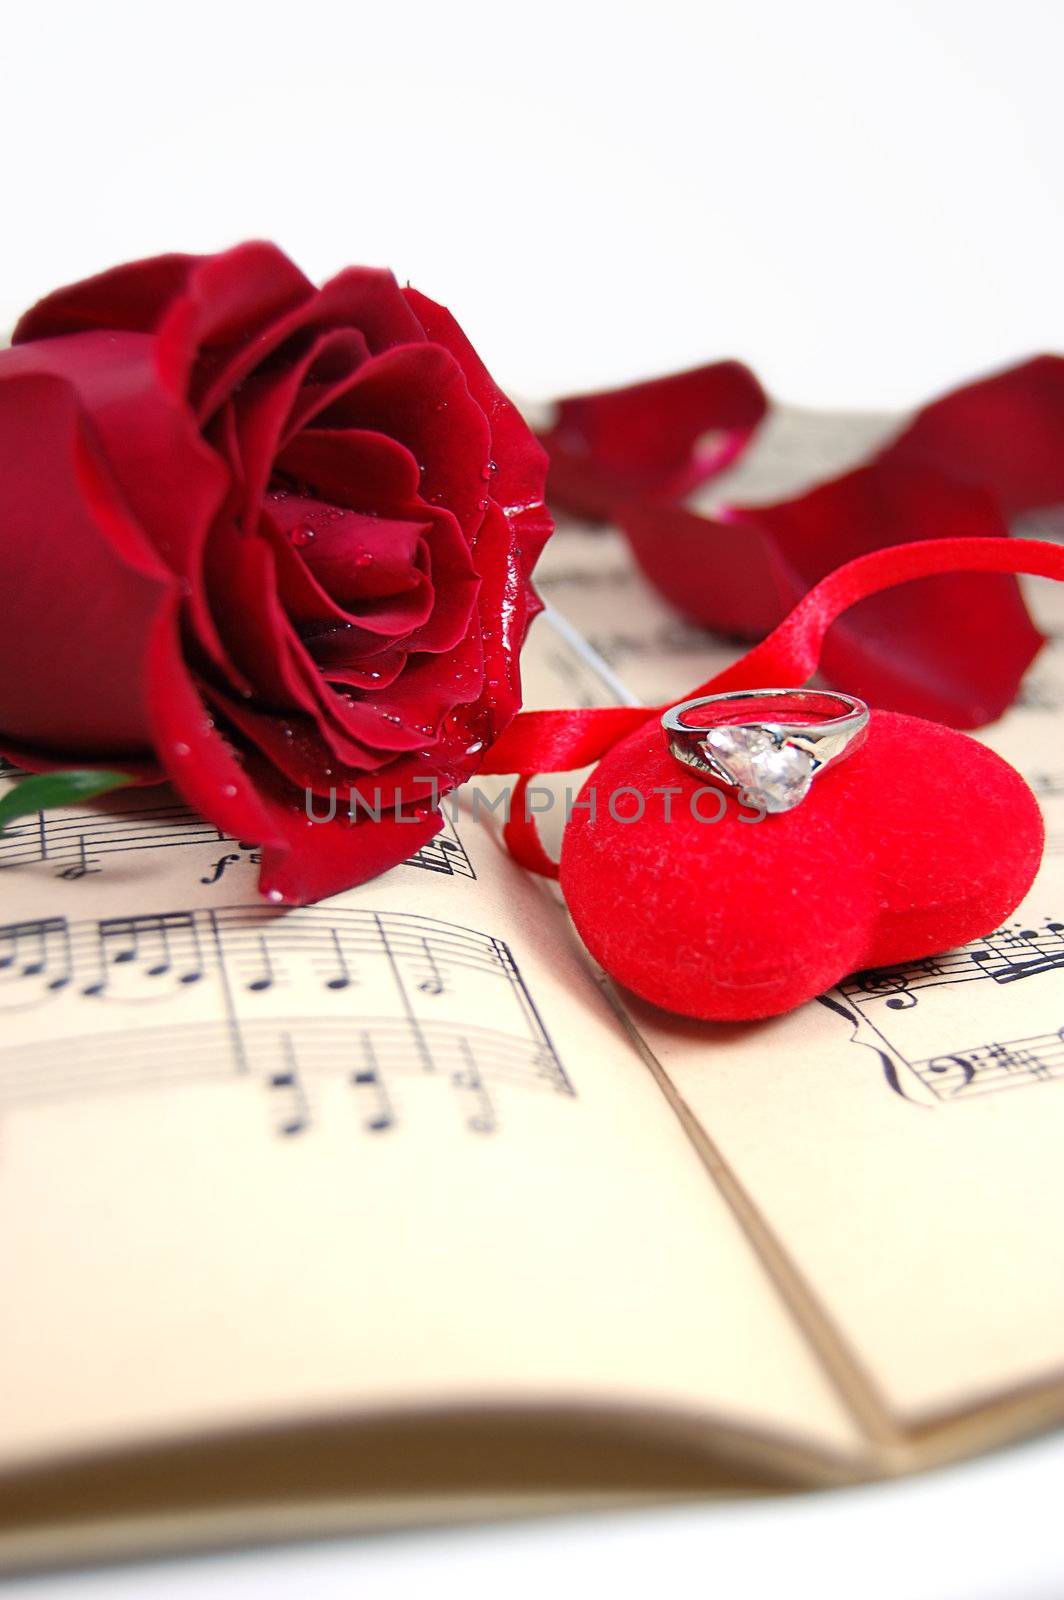 Red rose and petals on music sheet with fabric heart